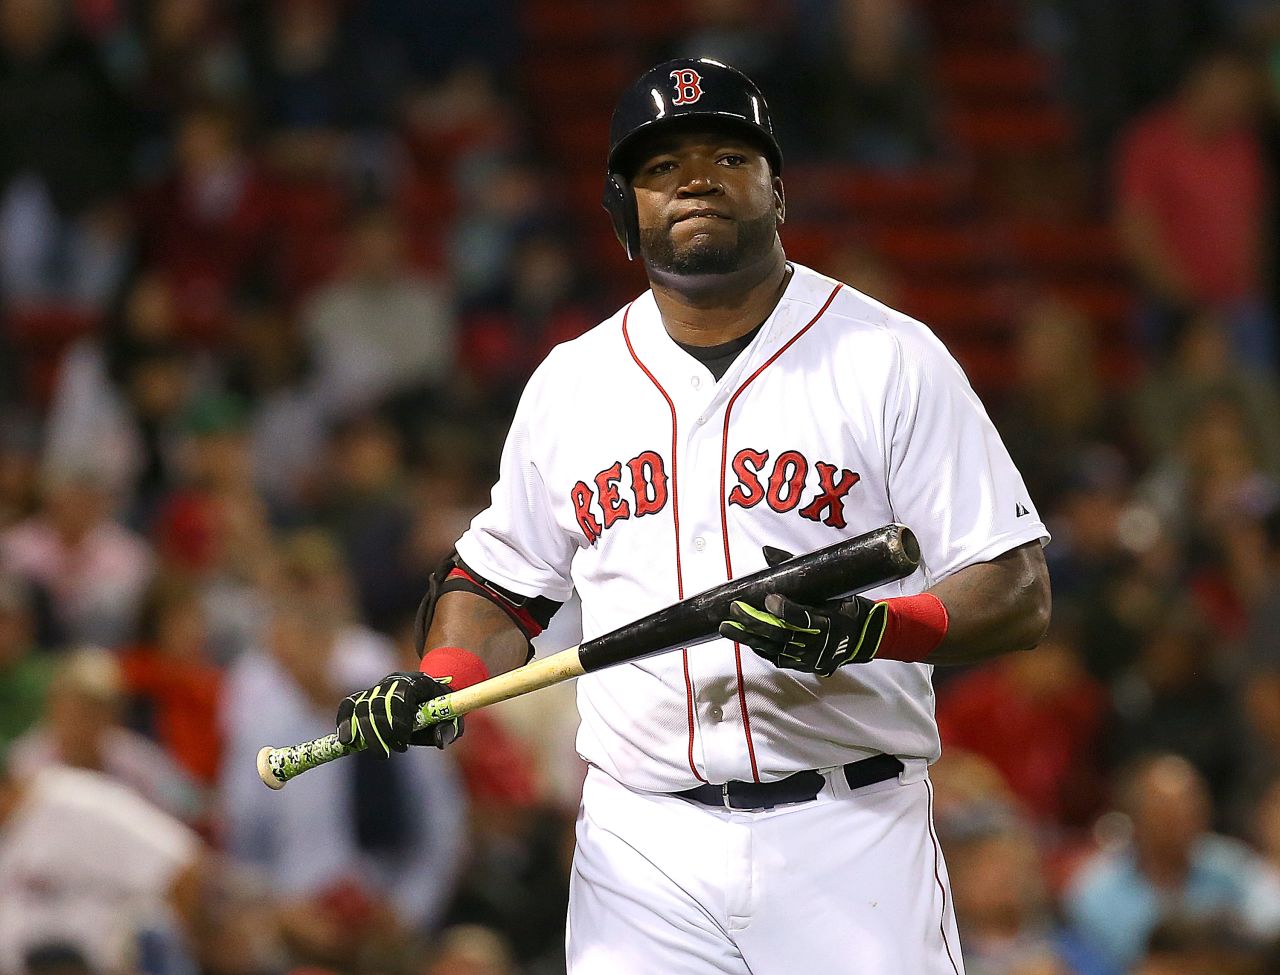 David Ortiz of the Boston Red Sox during the eighth inning of the game against the Tampa Bay Rays at Fenway Park on September 22, 2015 in Boston, Massachusetts.